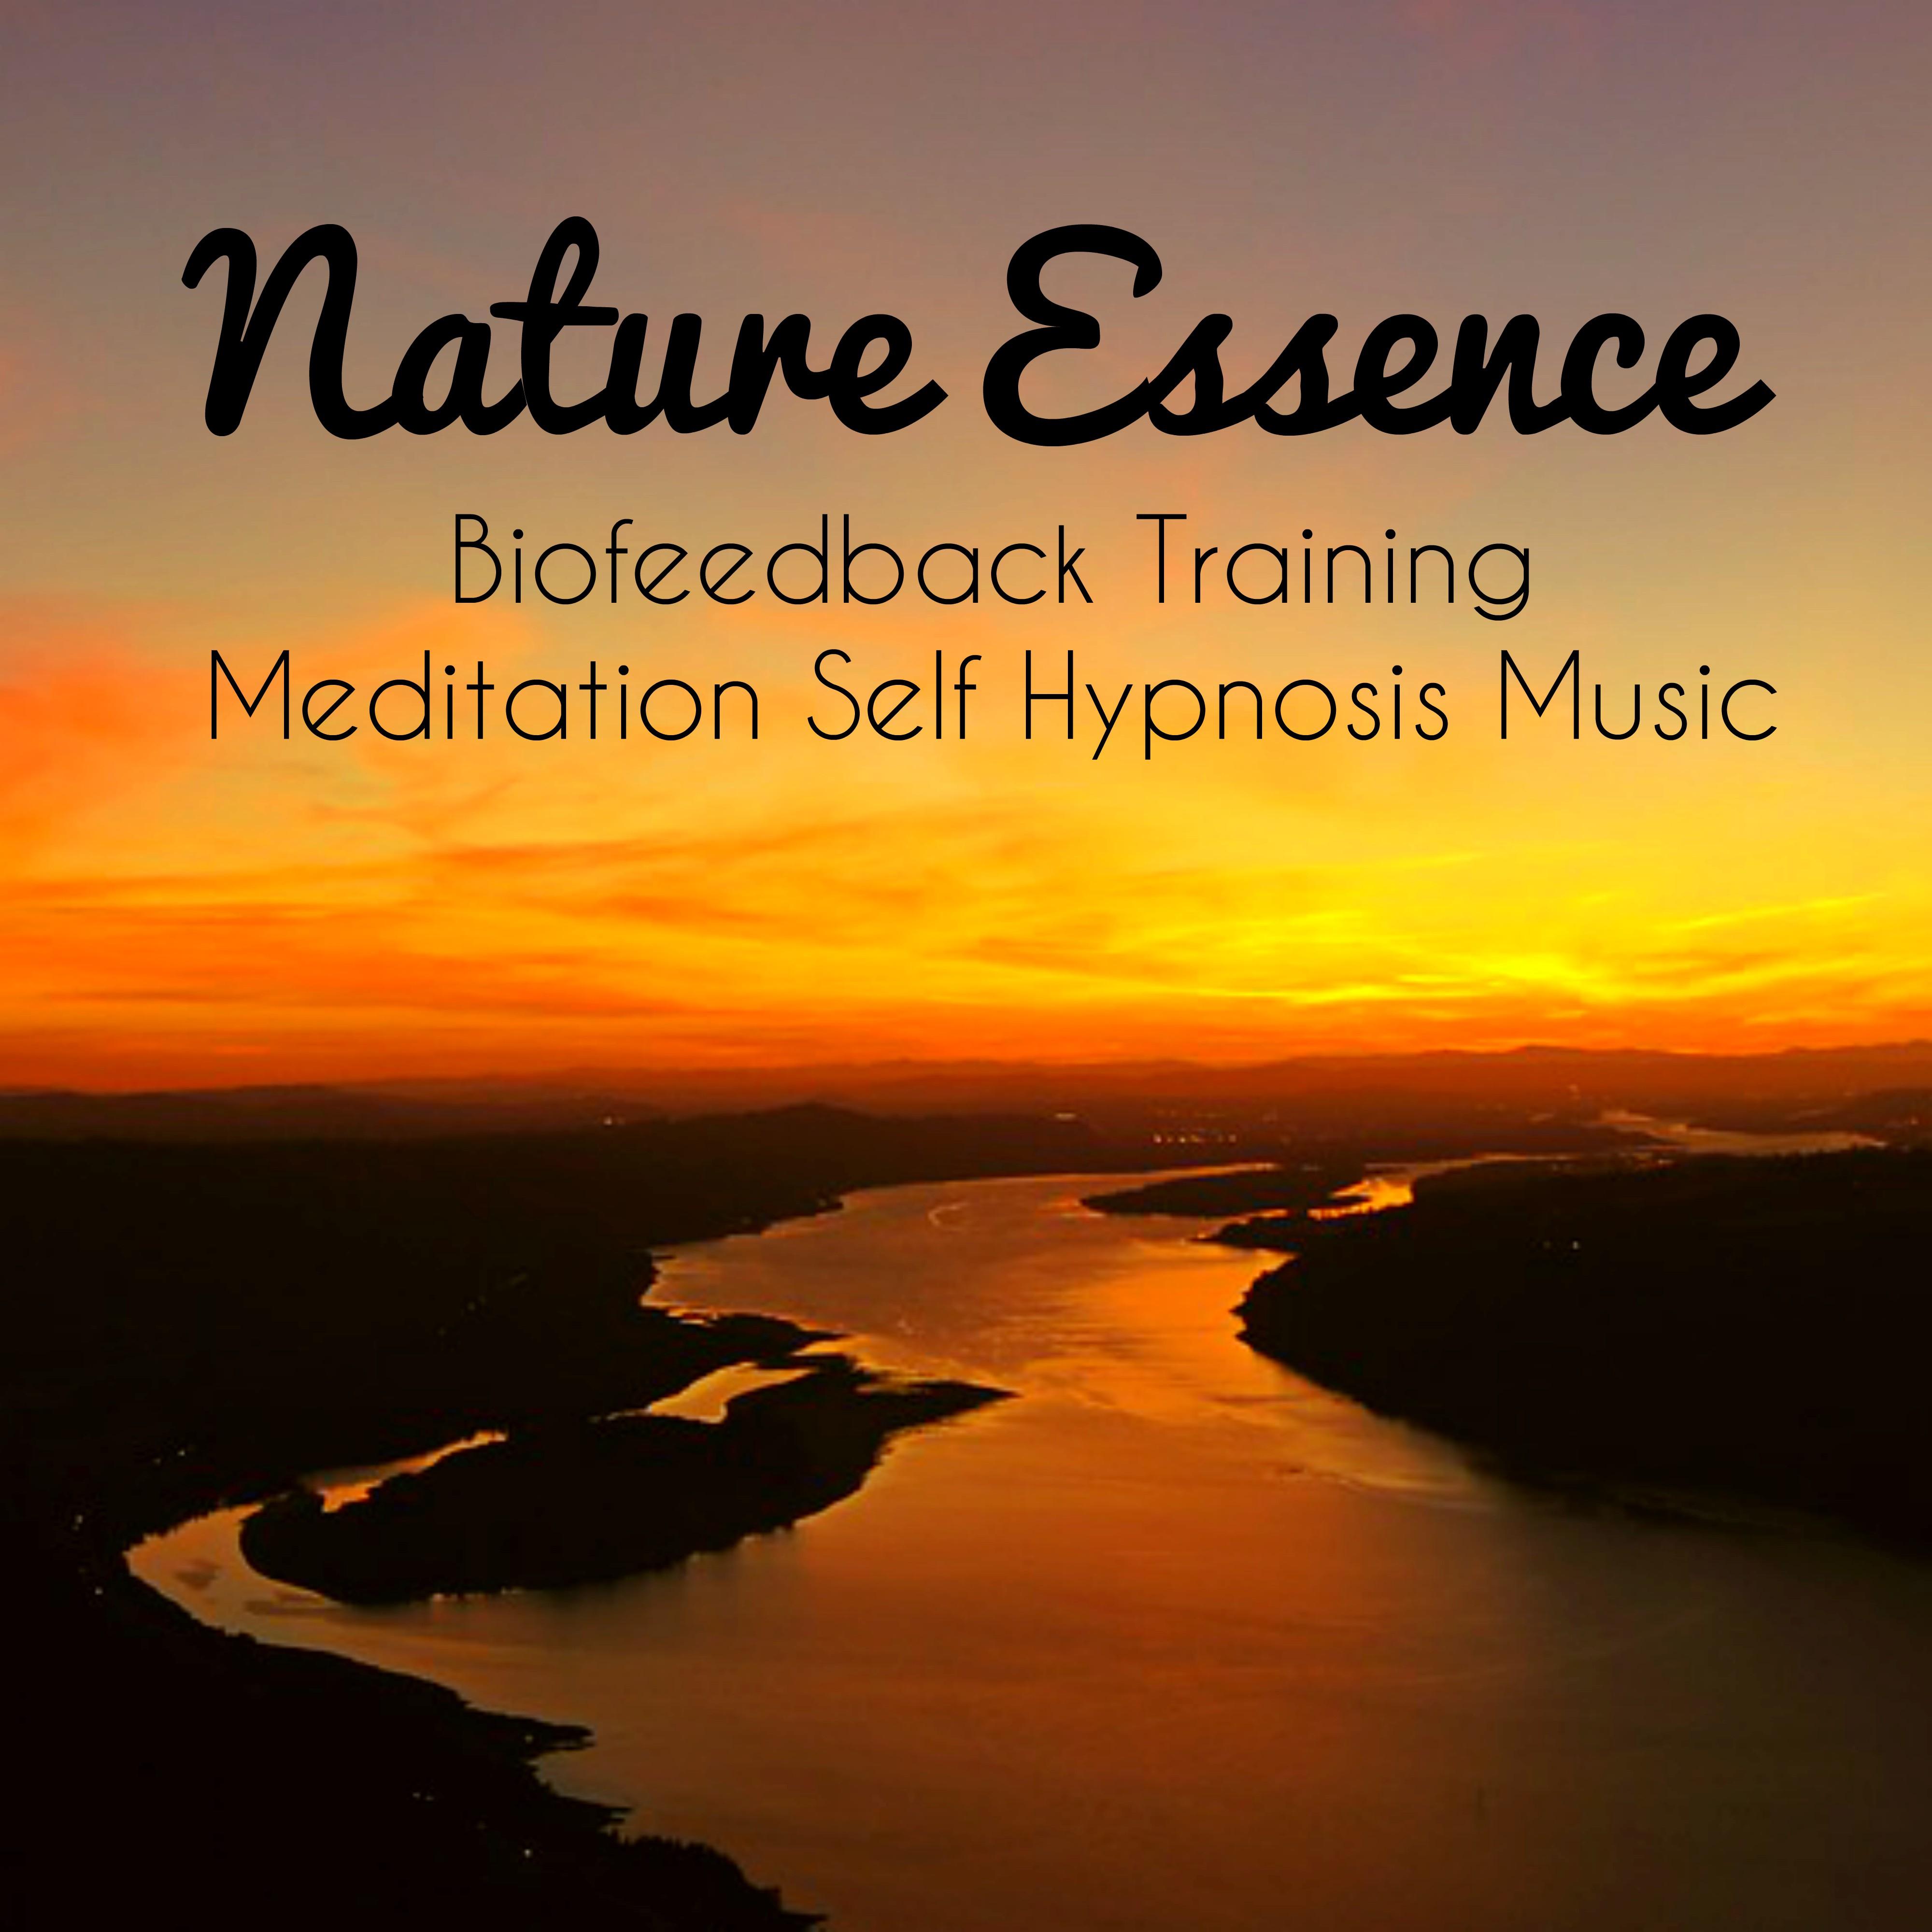 Nature Essence - Biofeedback Training Meditation Self Hypnosis Music for Deep Concentration Relax Time Smile Therapy with Binaural New Age Ambiental Sounds